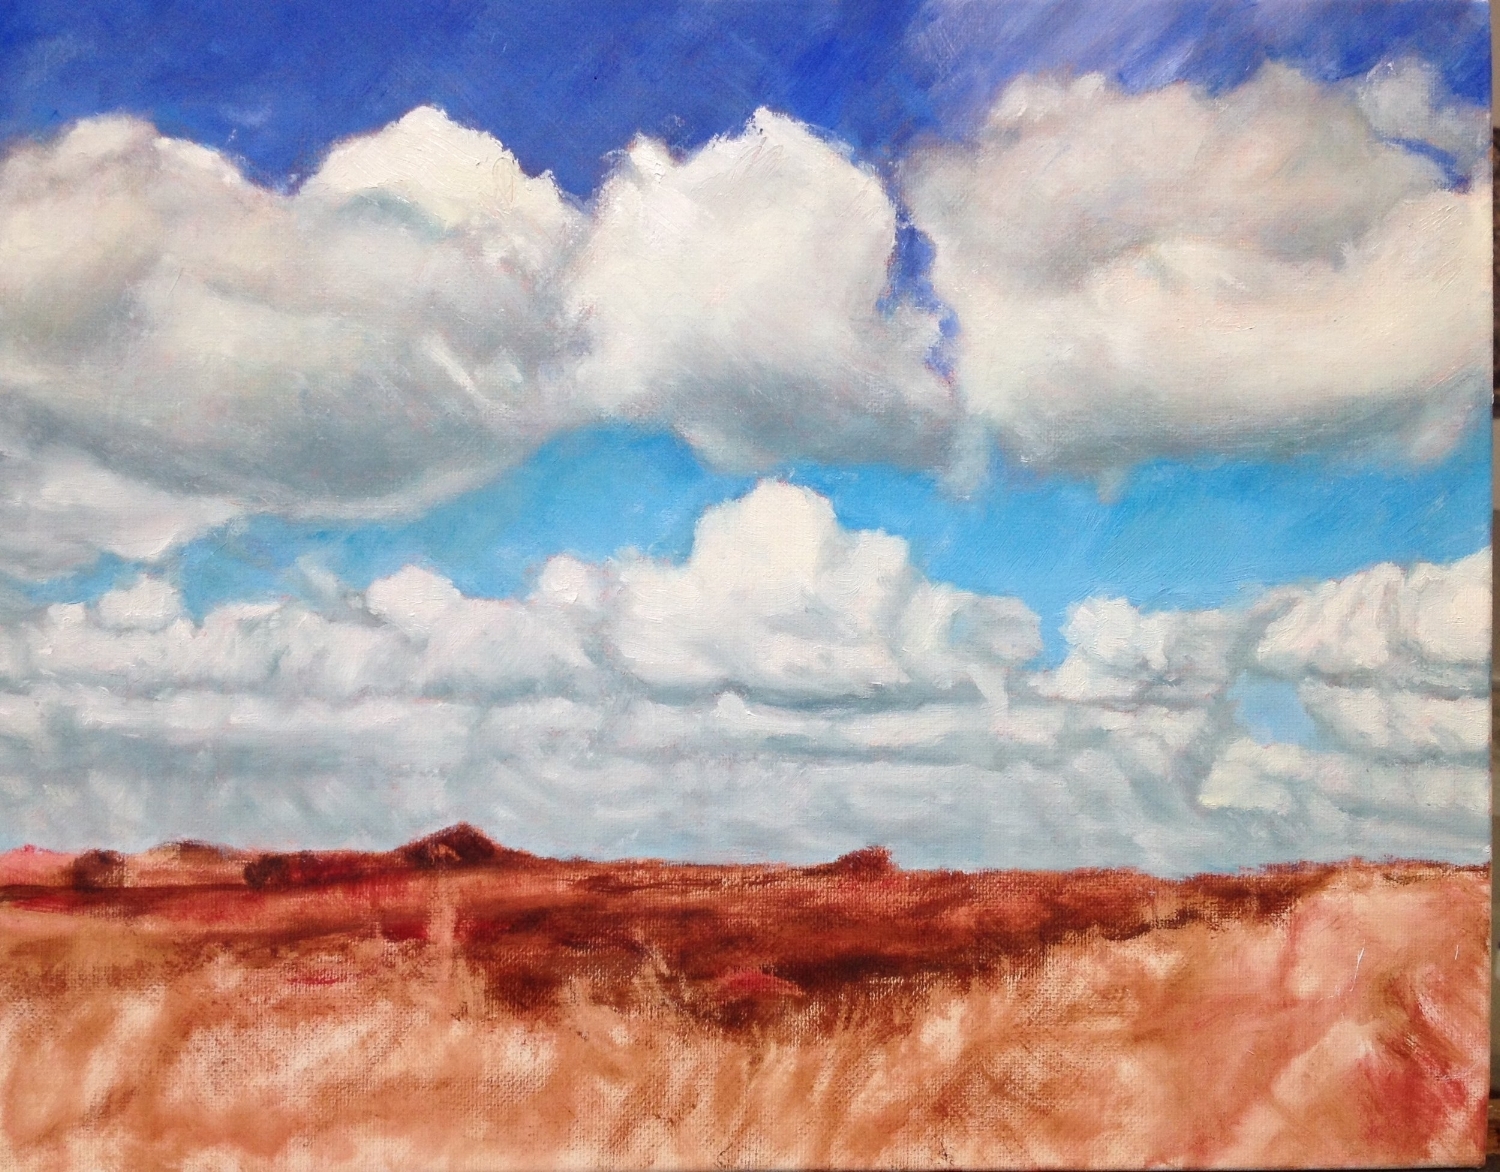 Work in progress: Sky with Clouds